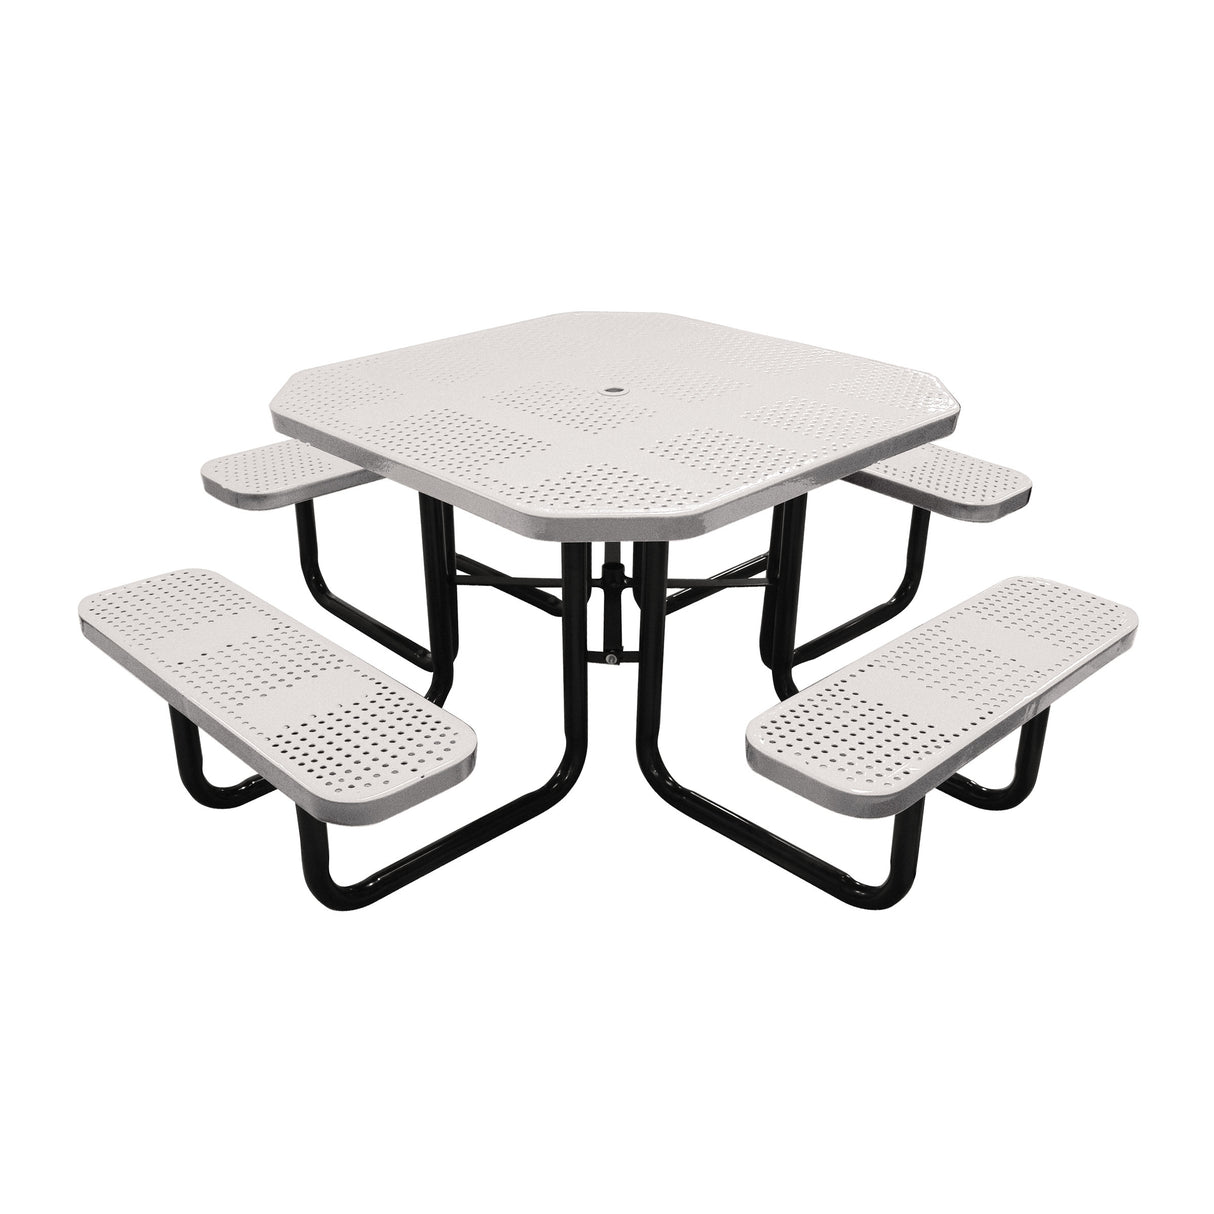 46˝ Octagonal Perforated Table